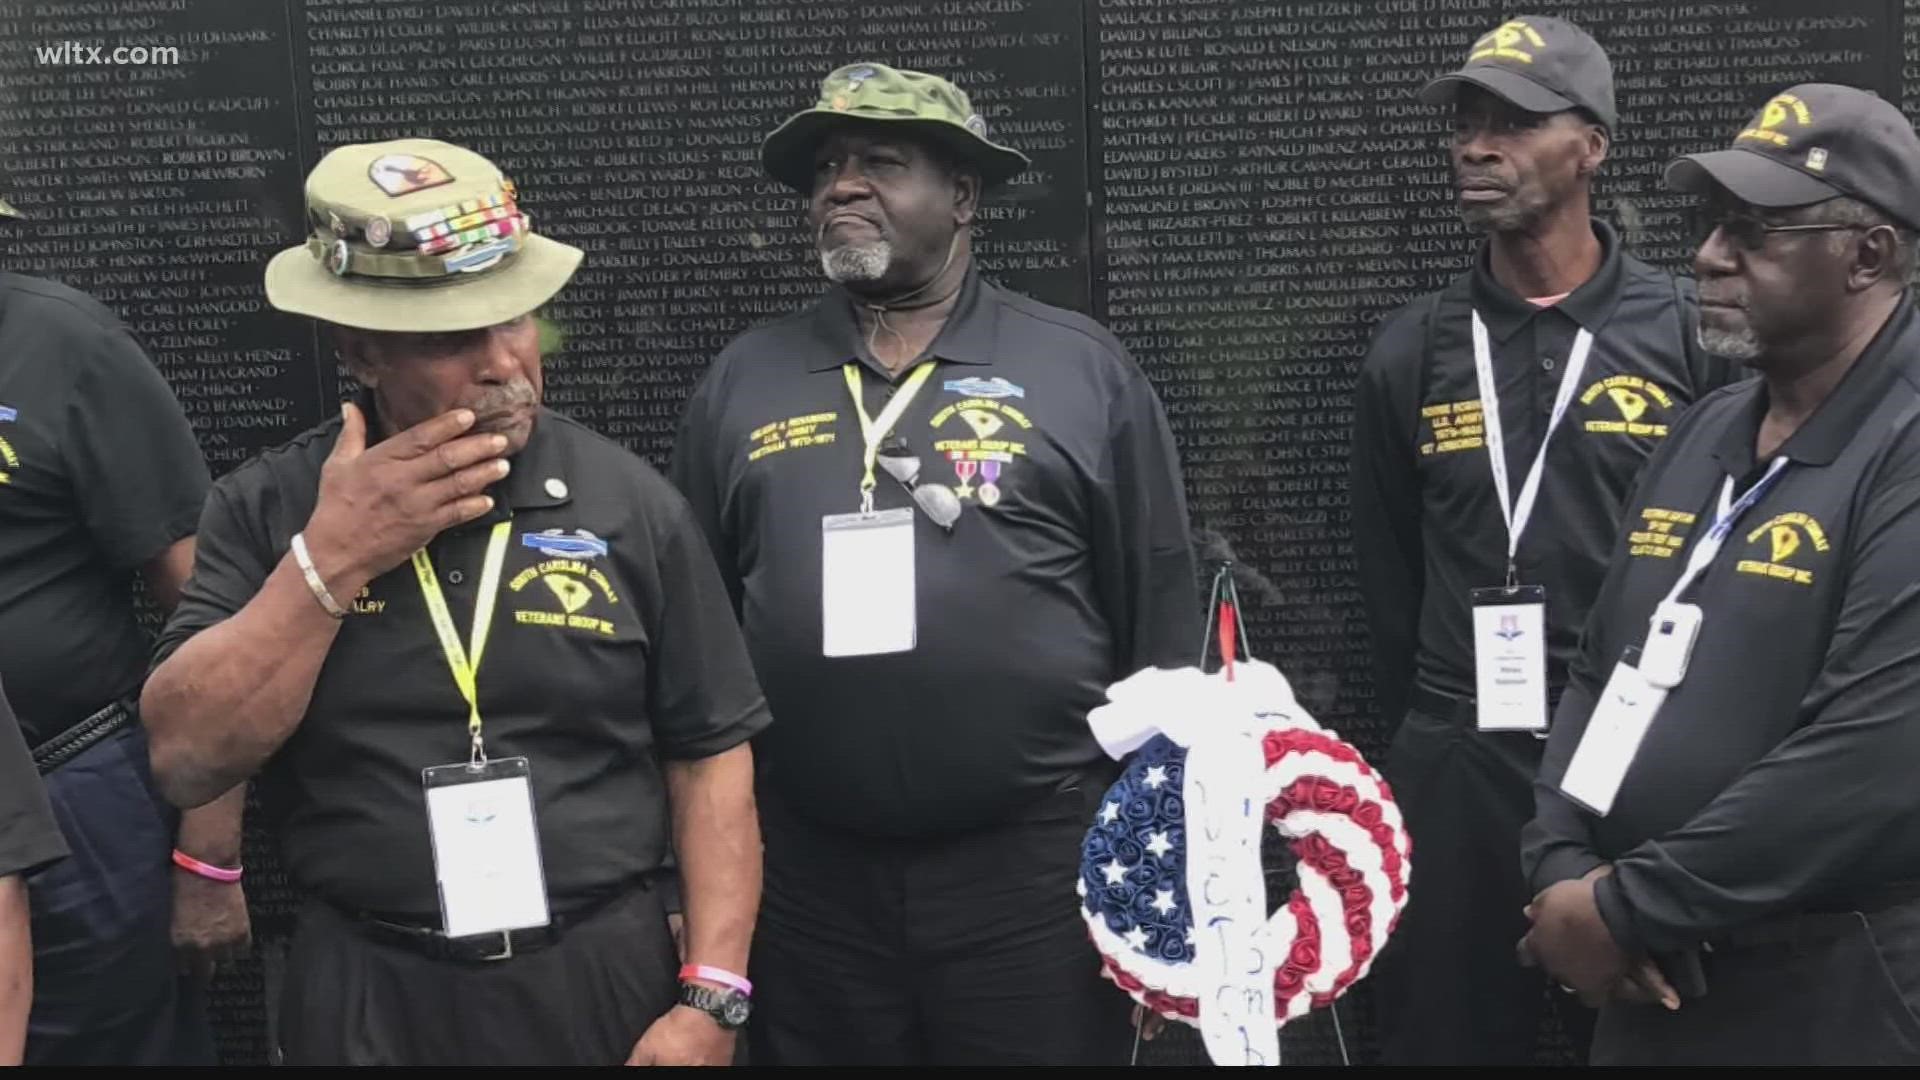 Sunday afternoon, a group of Vietnam Veterans returned from a trip to Washington that held special meaning.